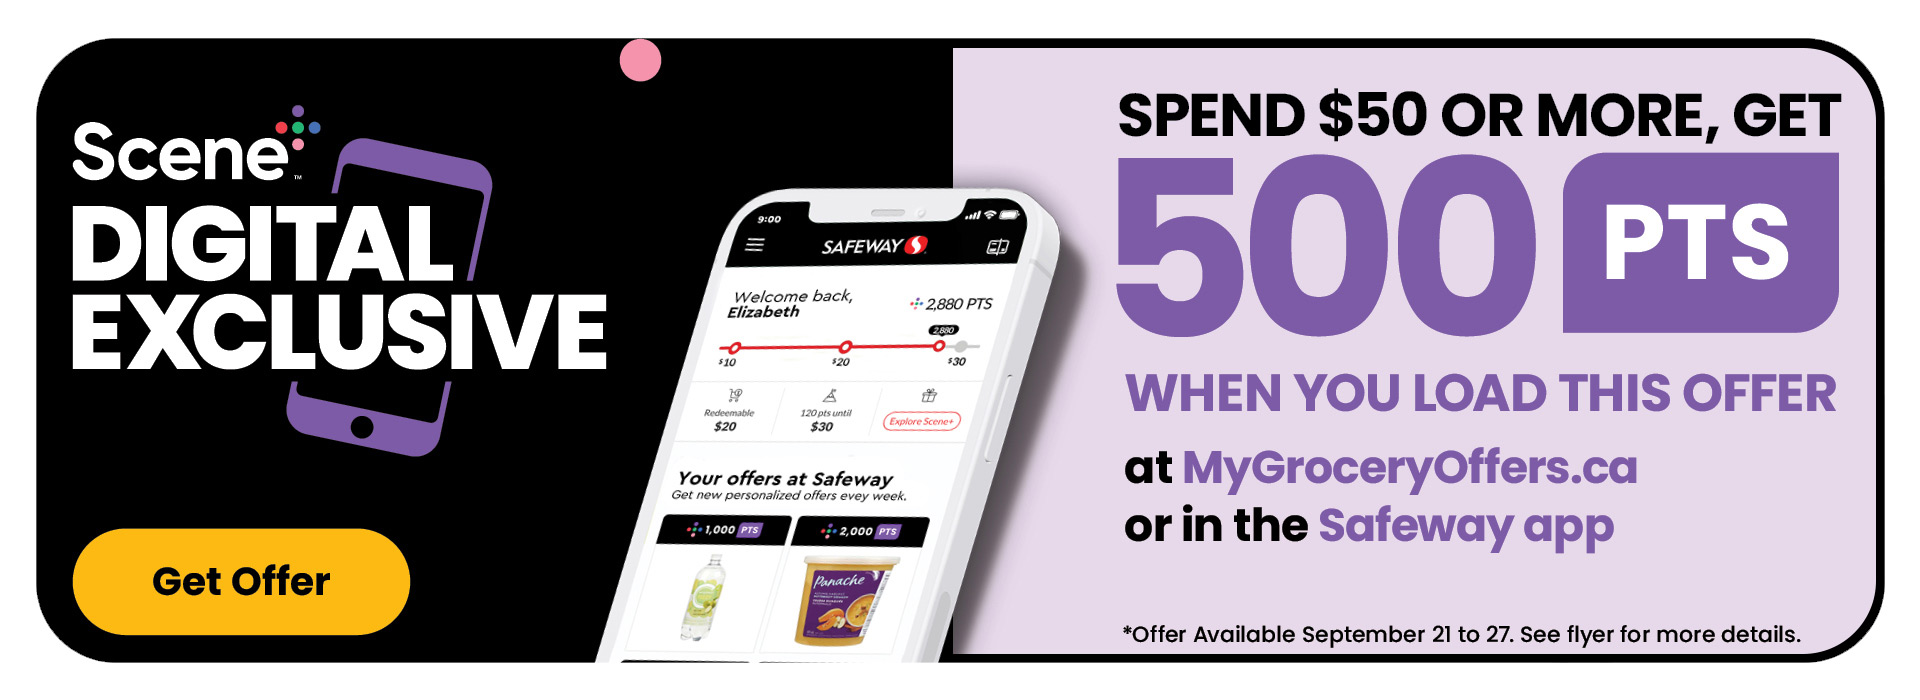 Scene+ Digital Exclusive! Load It to Get It! Spend $50 or more, get 500 PTS when you load this offer at MyGroceryOffers.ca or in the Safeway App.